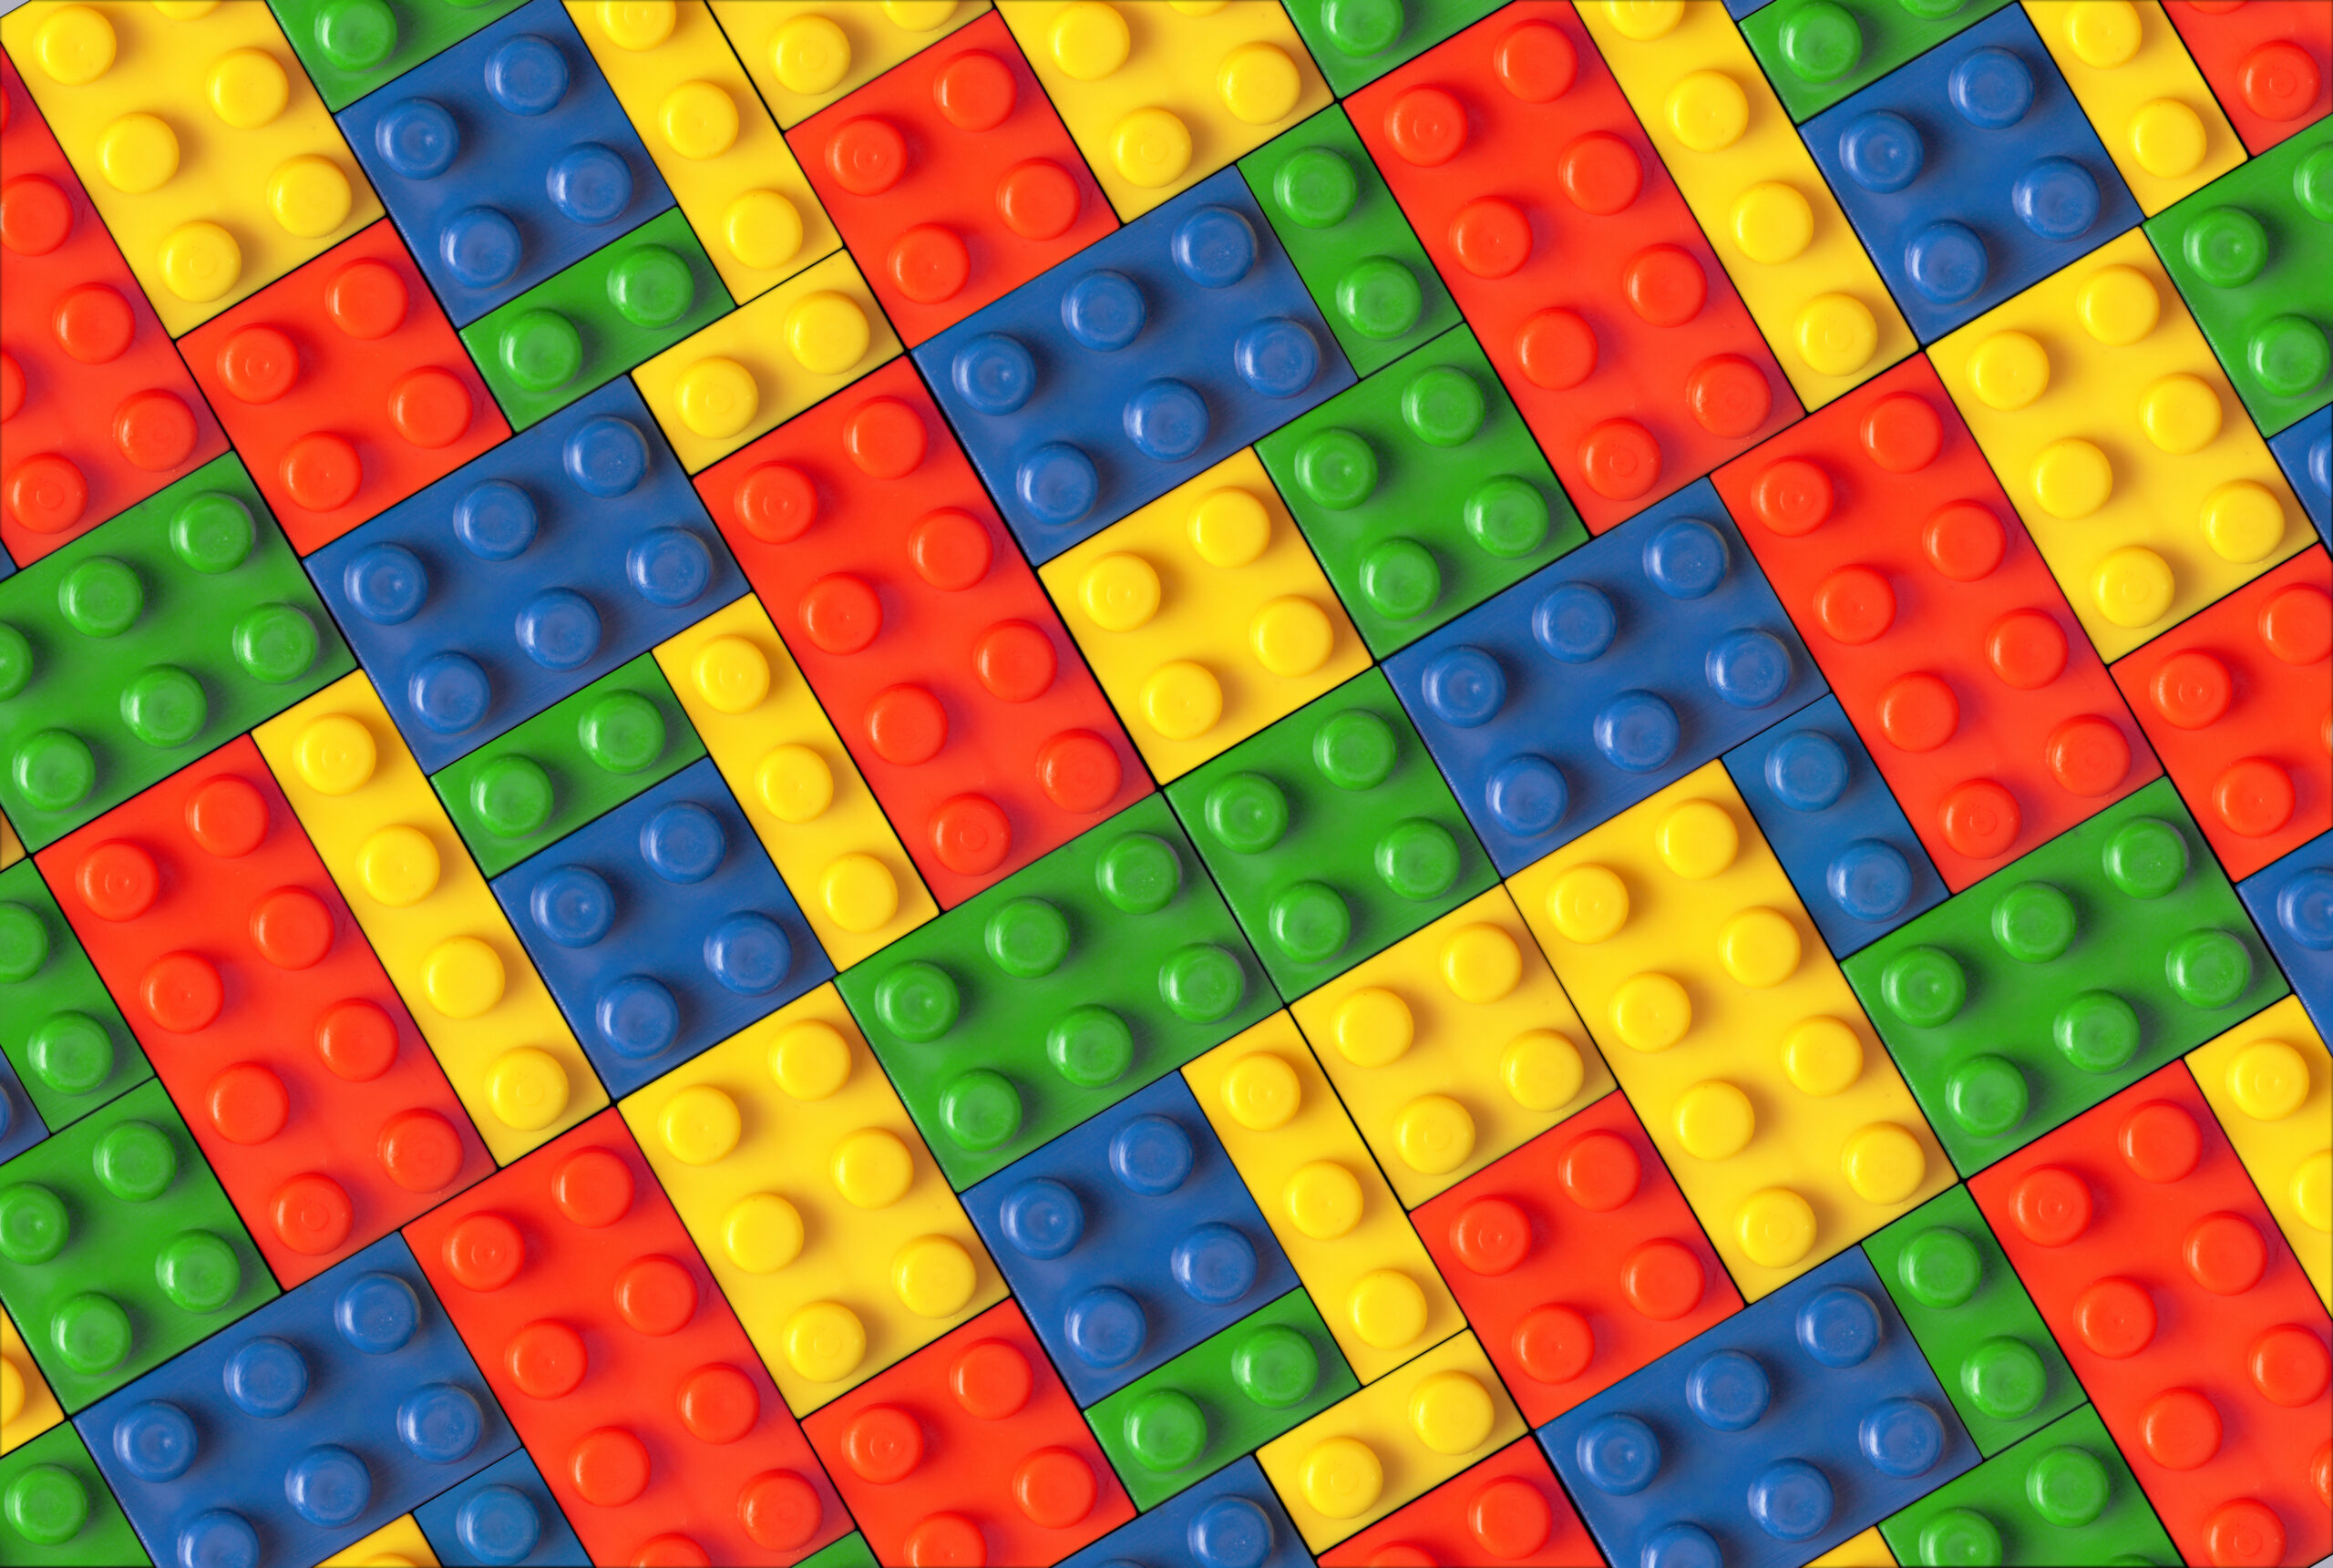 Anonym Engager vedhæng Lego blocks could be the key to detecting nerve gases in the field